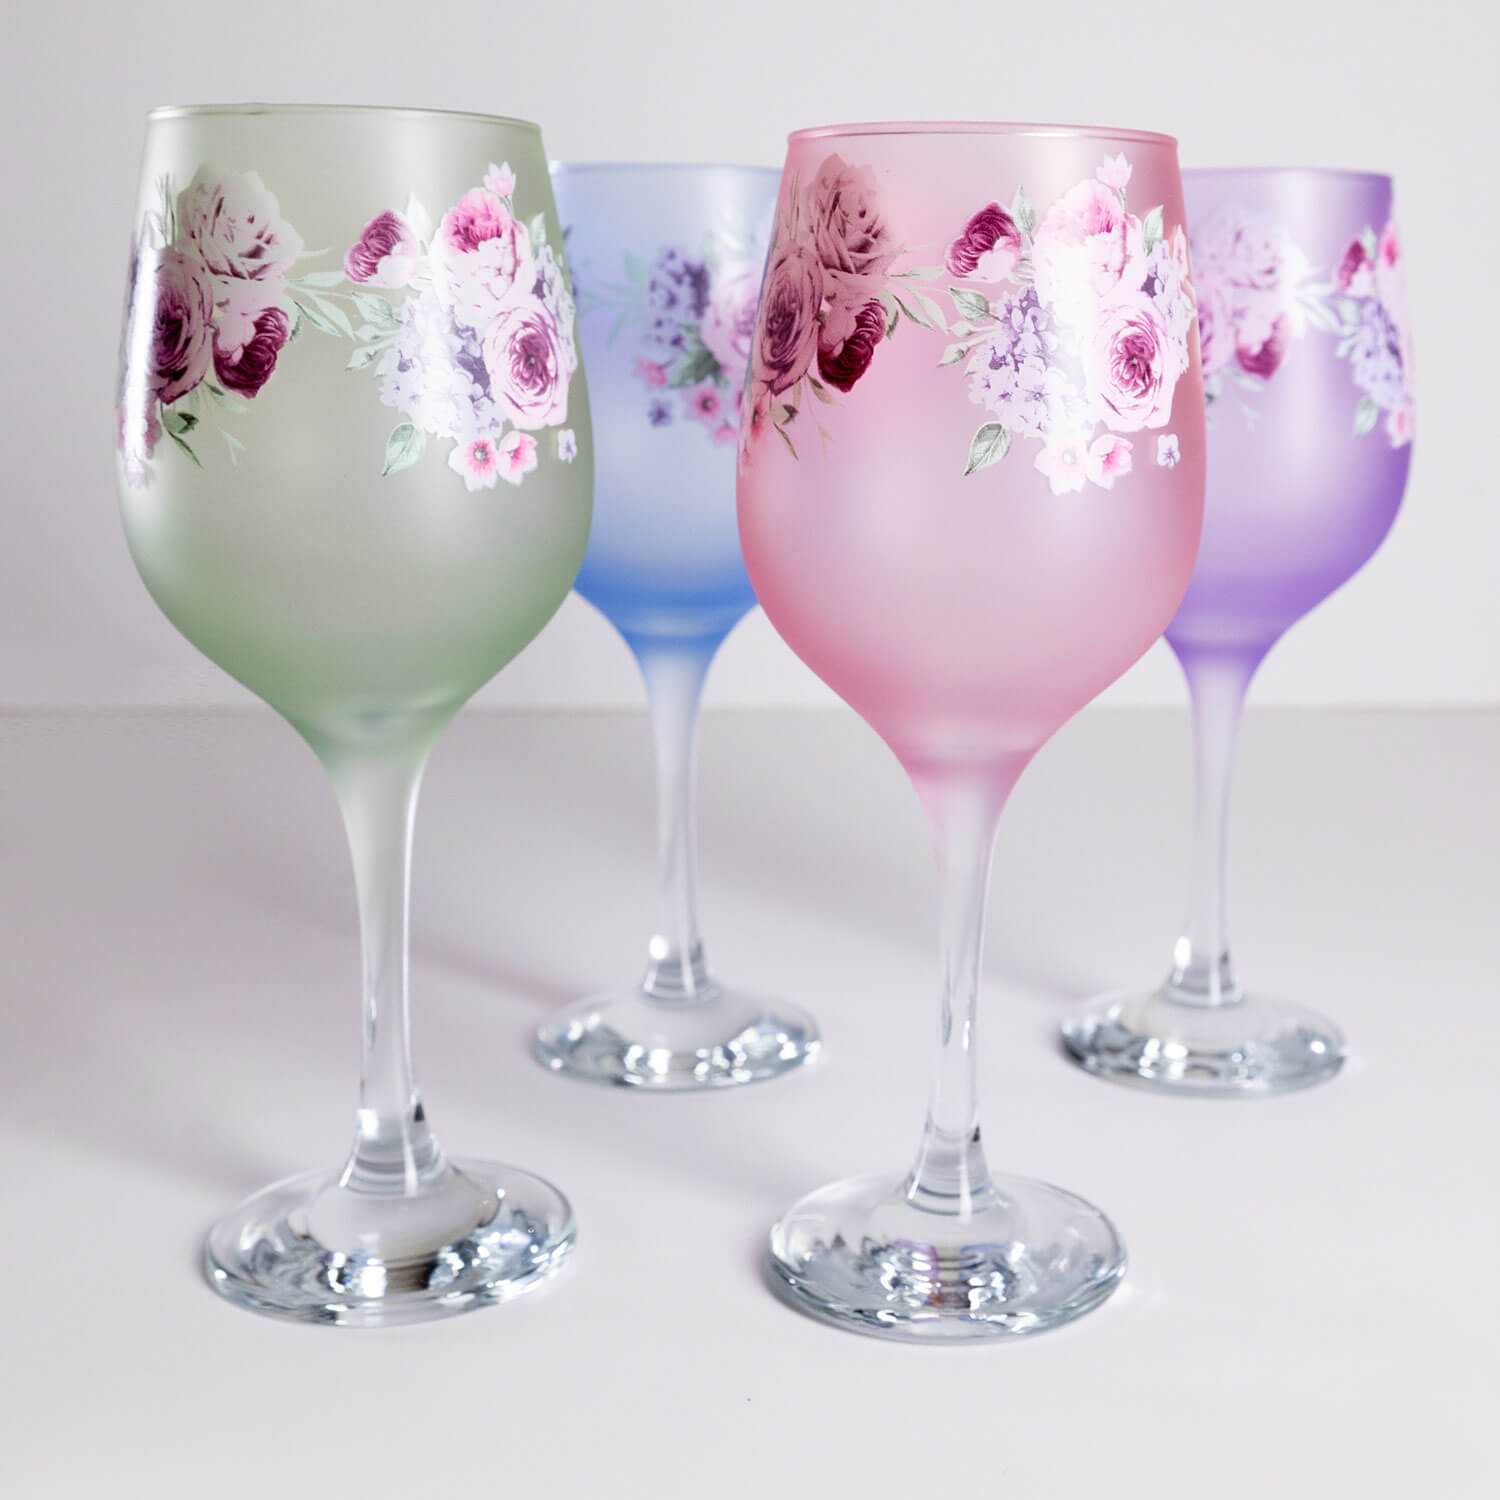 Killarney Crystal Floral Wine Glasses Set of 4 2 Shaws Department Stores